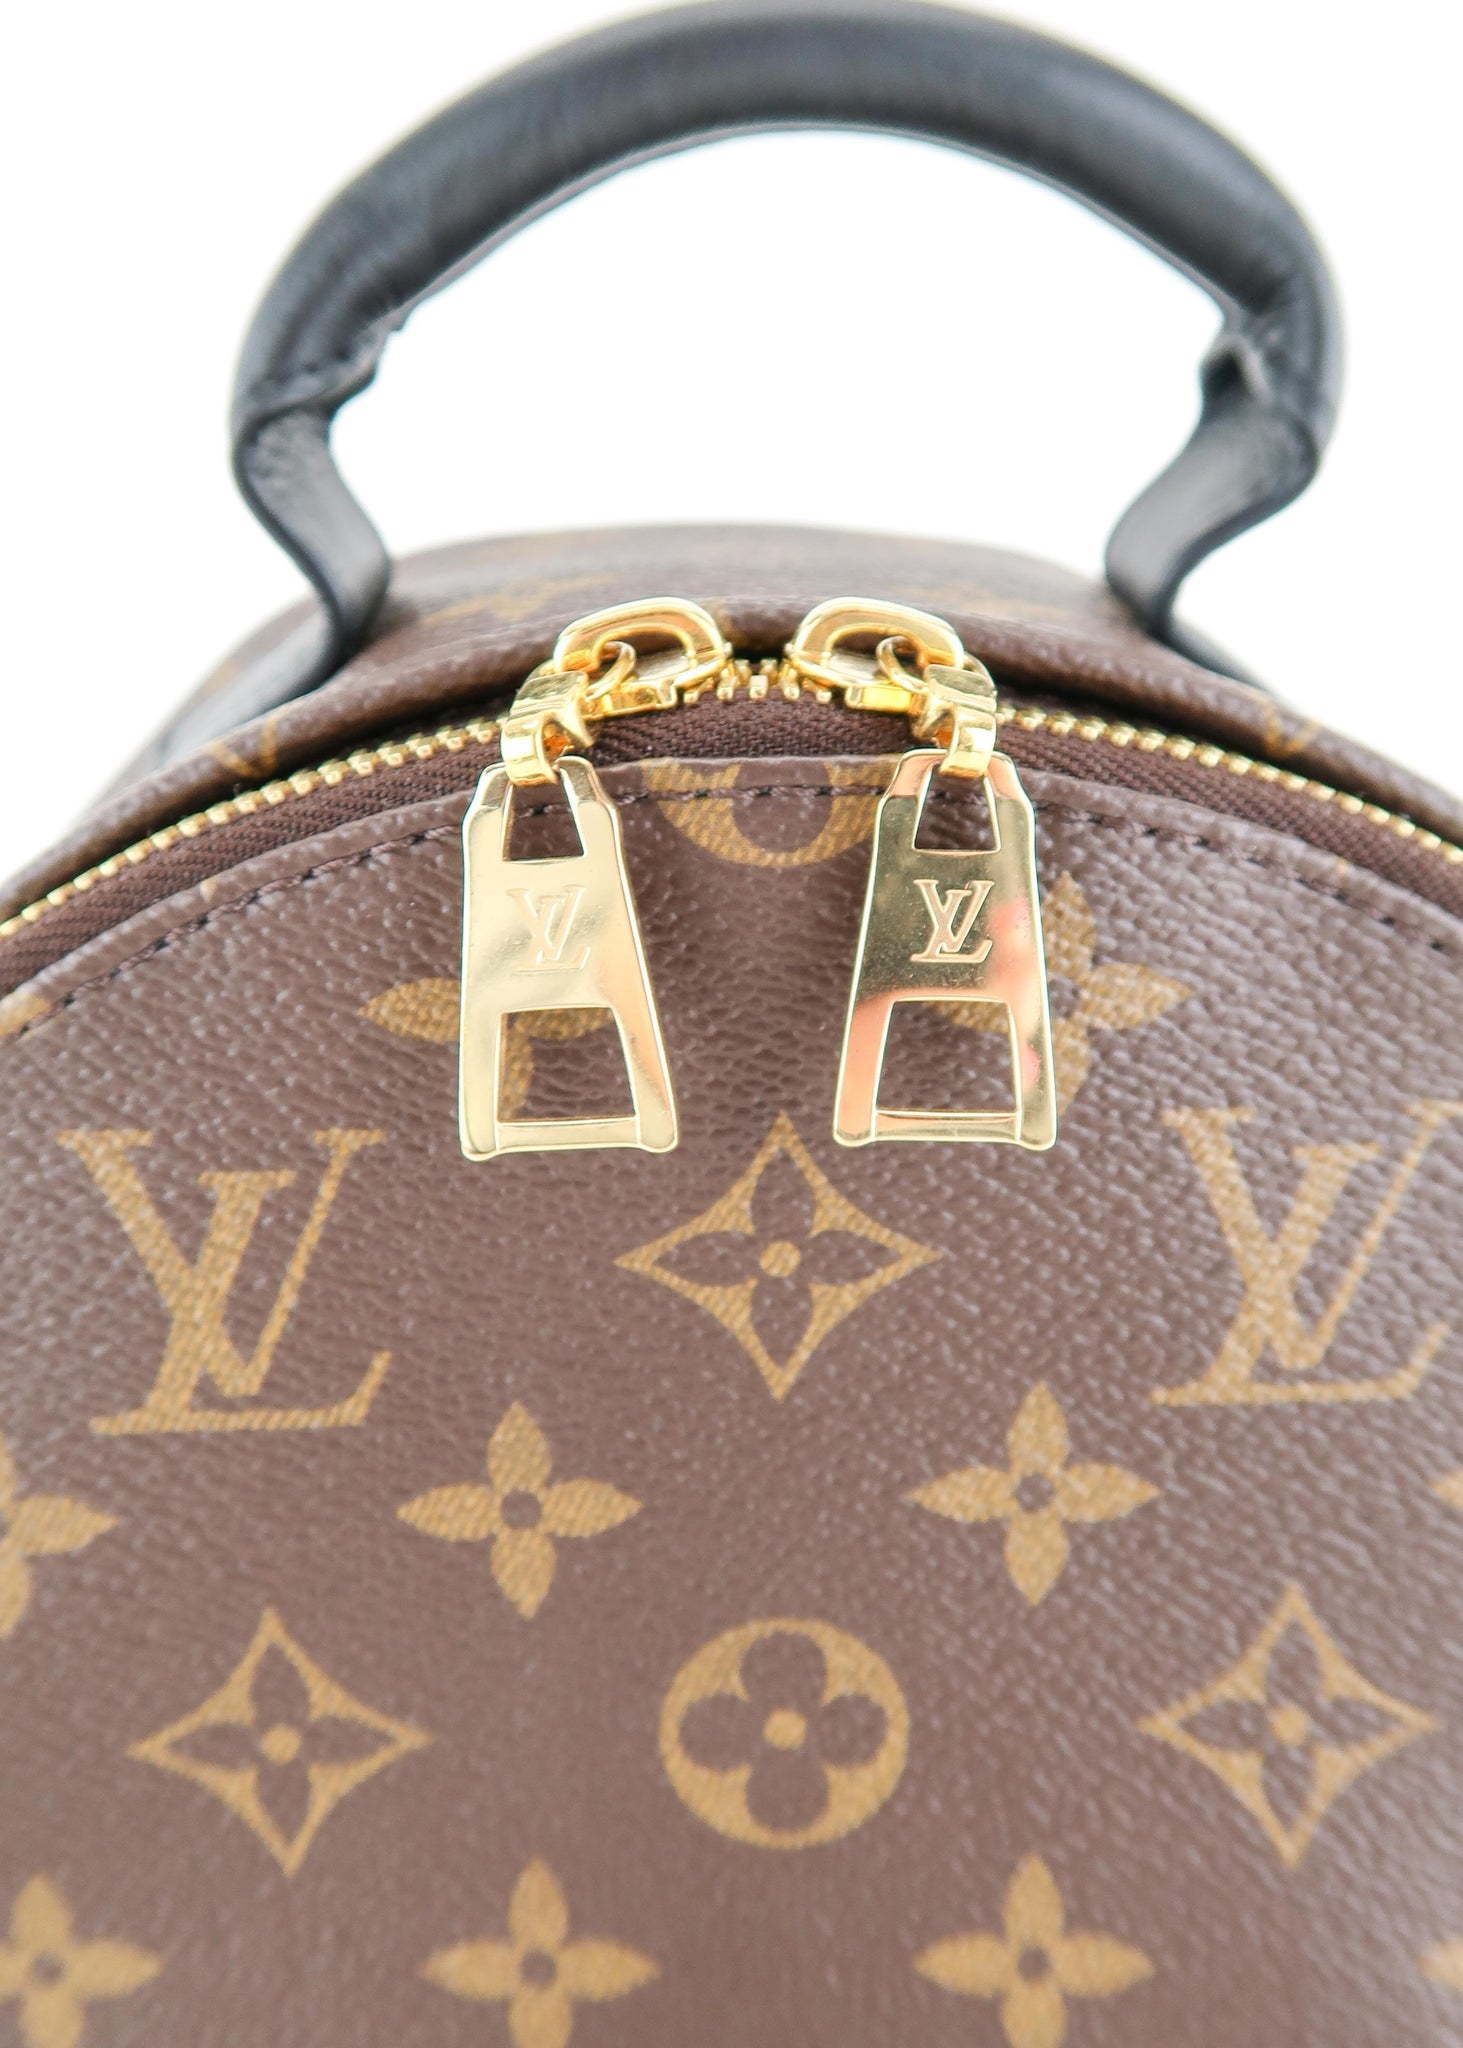 Louis Vuitton knows what's hot in Palm Springs; check out